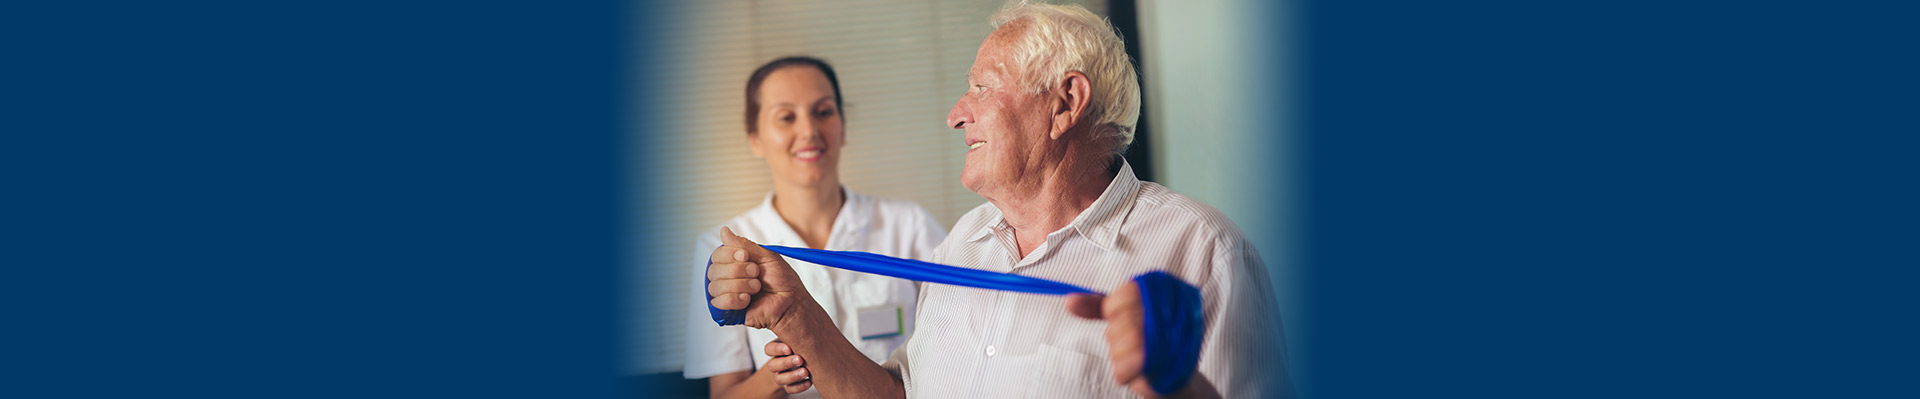 Banner picture of a male patient doing Occupational Therapy. There is a female Occupational Therapist behind him as he is holding a stretchy material with both hands pulling it apart.